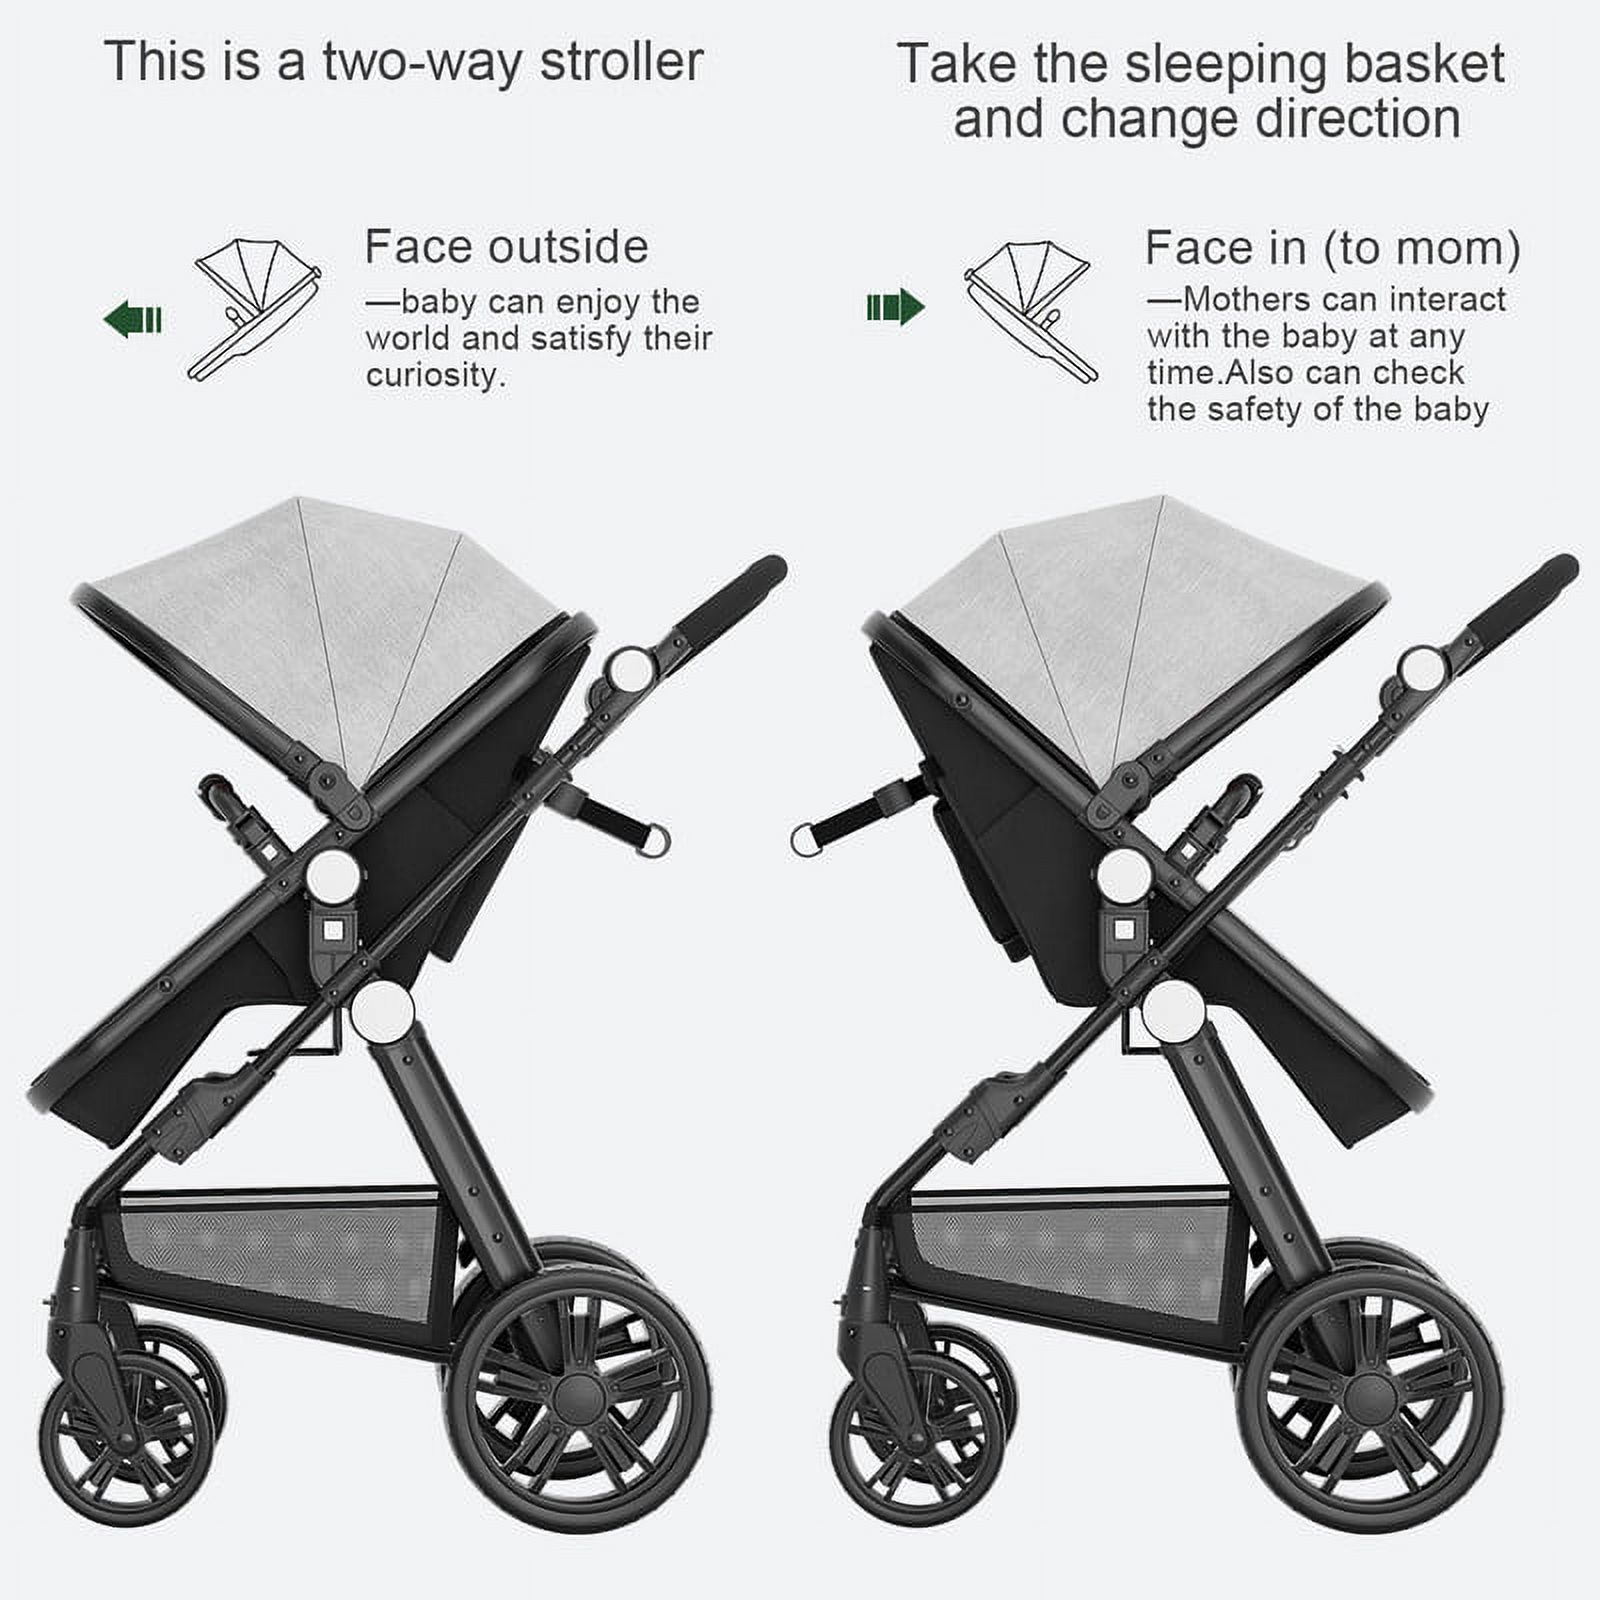 Cynebaby Foldable Baby Newborn Stroller for 0-36 Months Old Babies, Gray - image 5 of 10